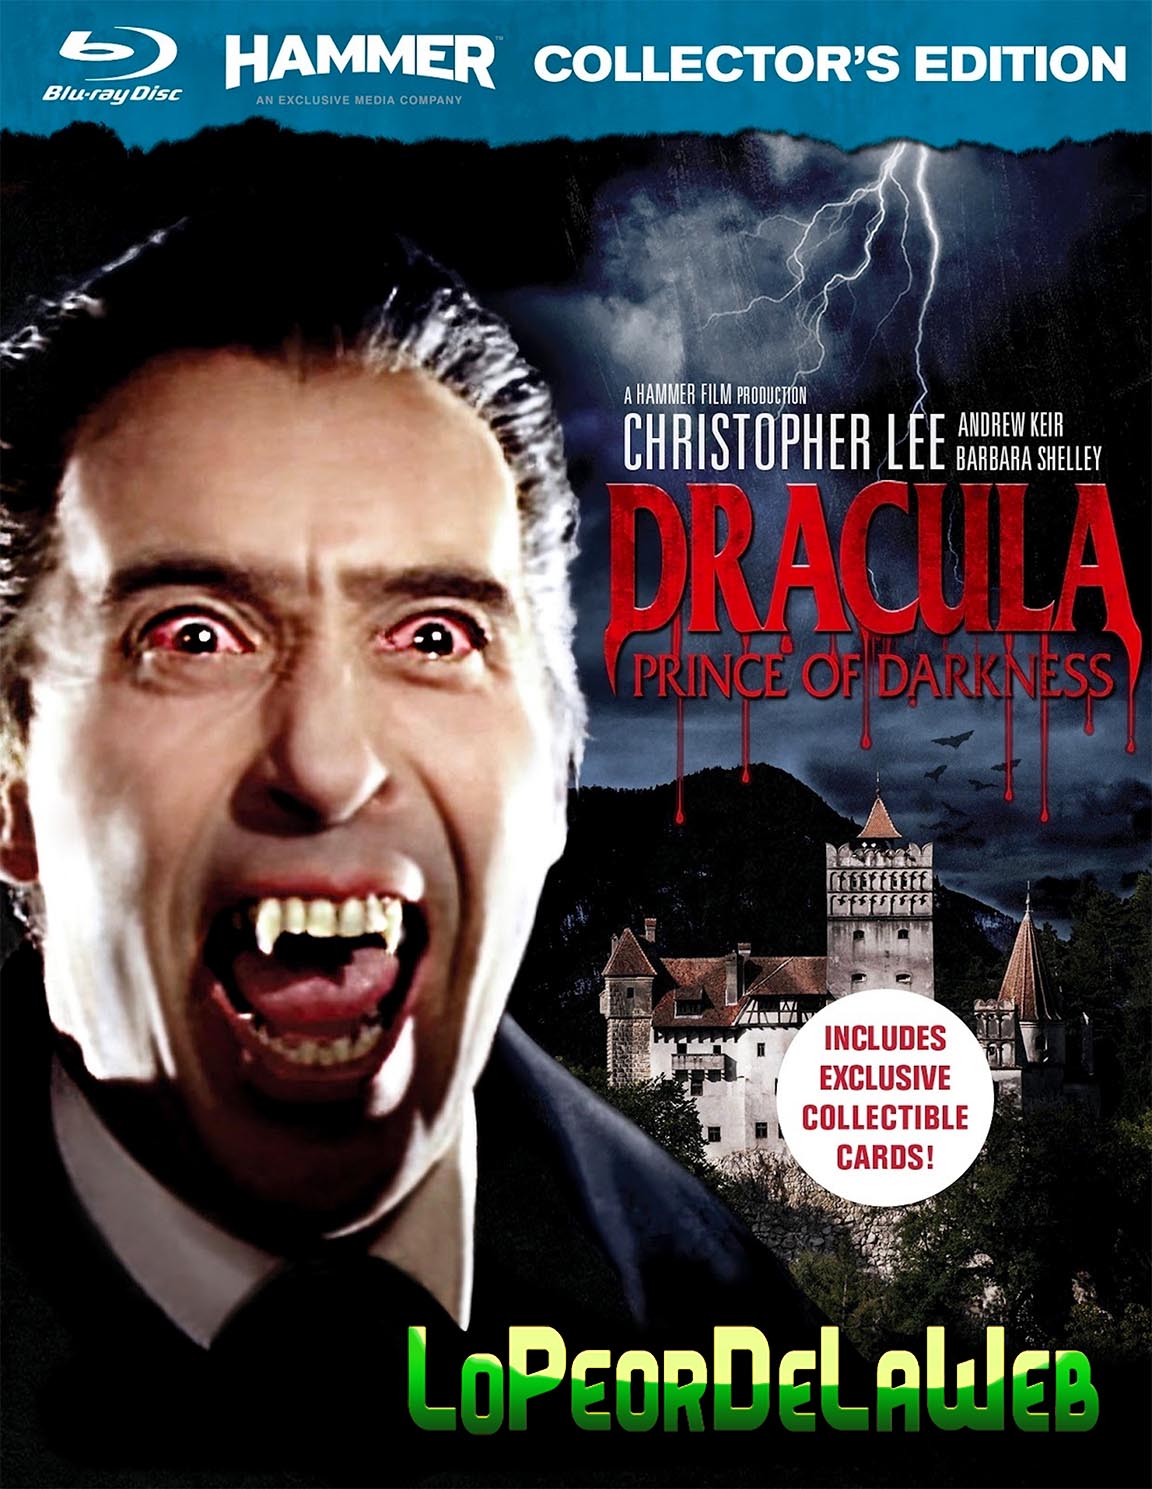 Dracula: Prince of Darkness (1966 / Christopher Lee)